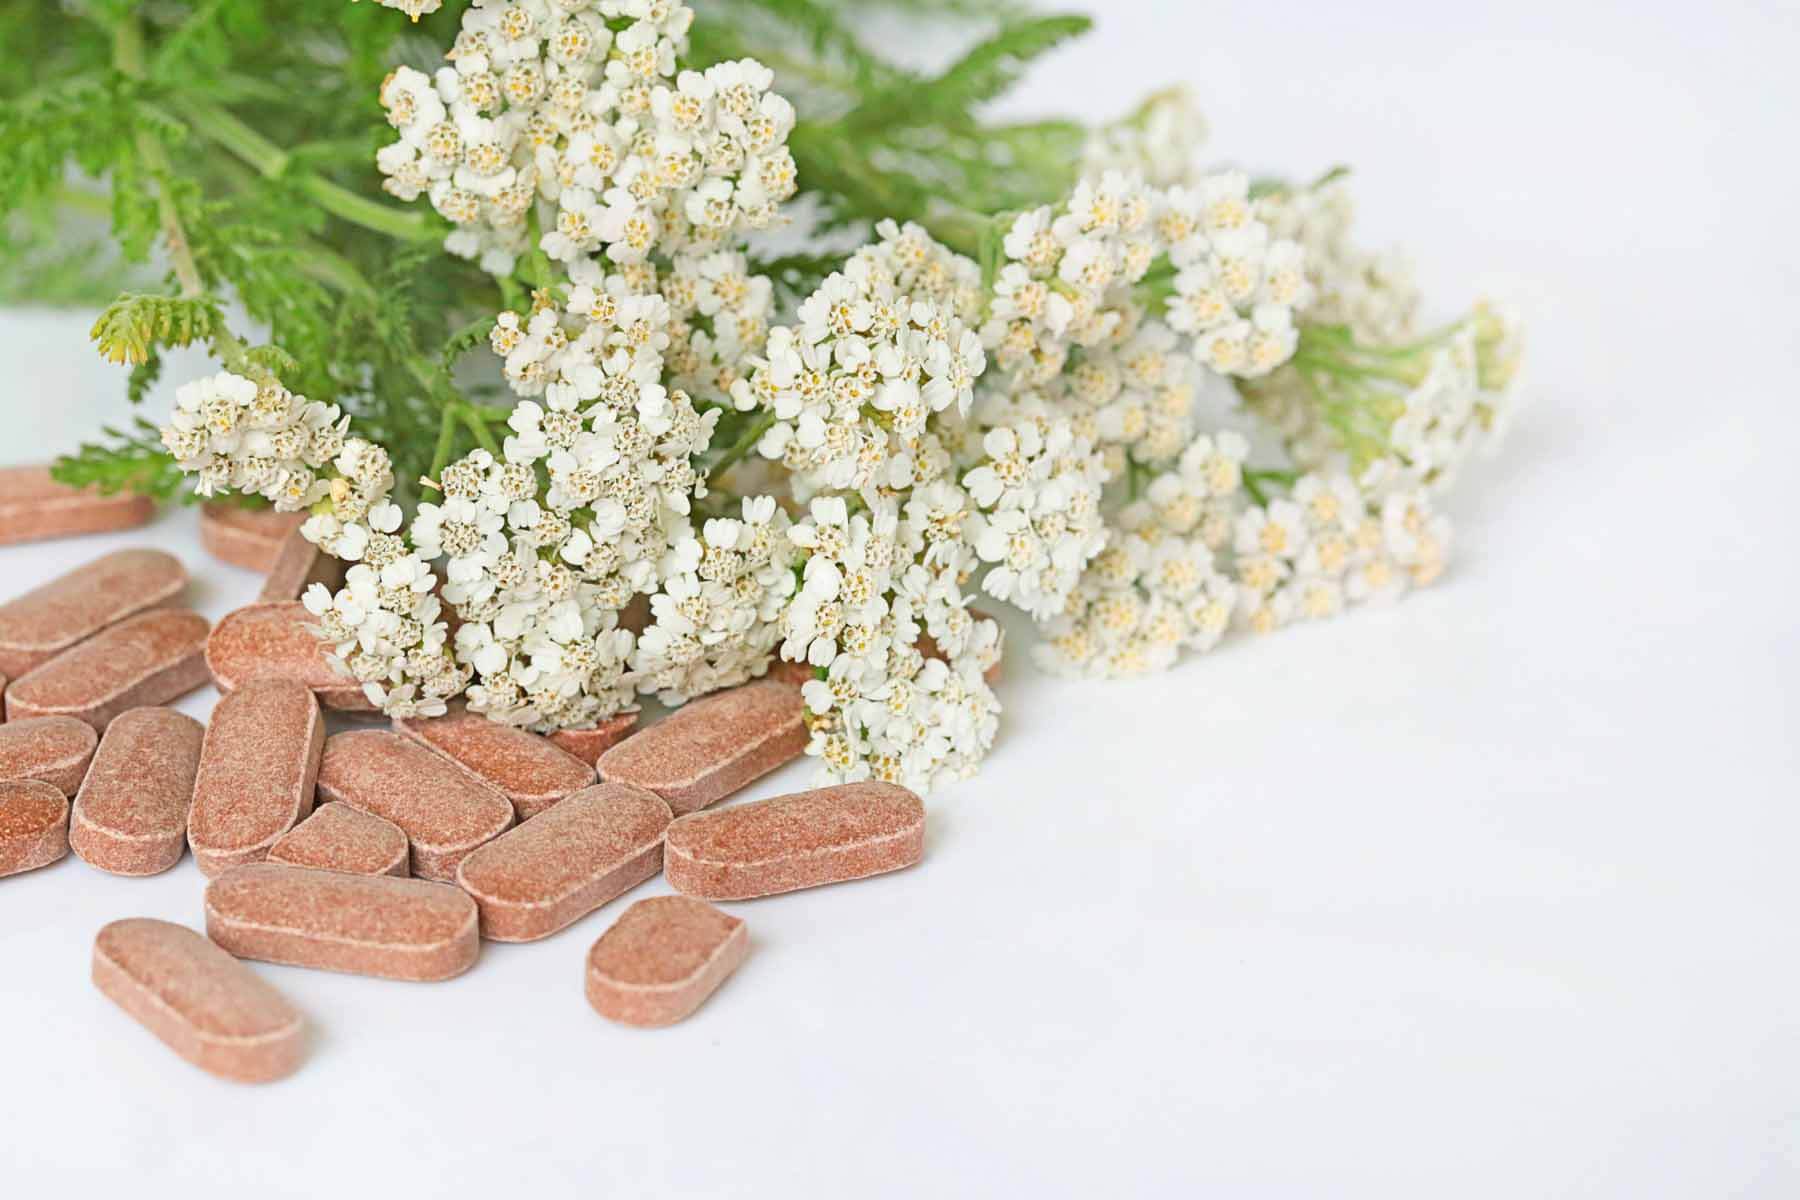 What are herbal remedies for anxiety and depression?